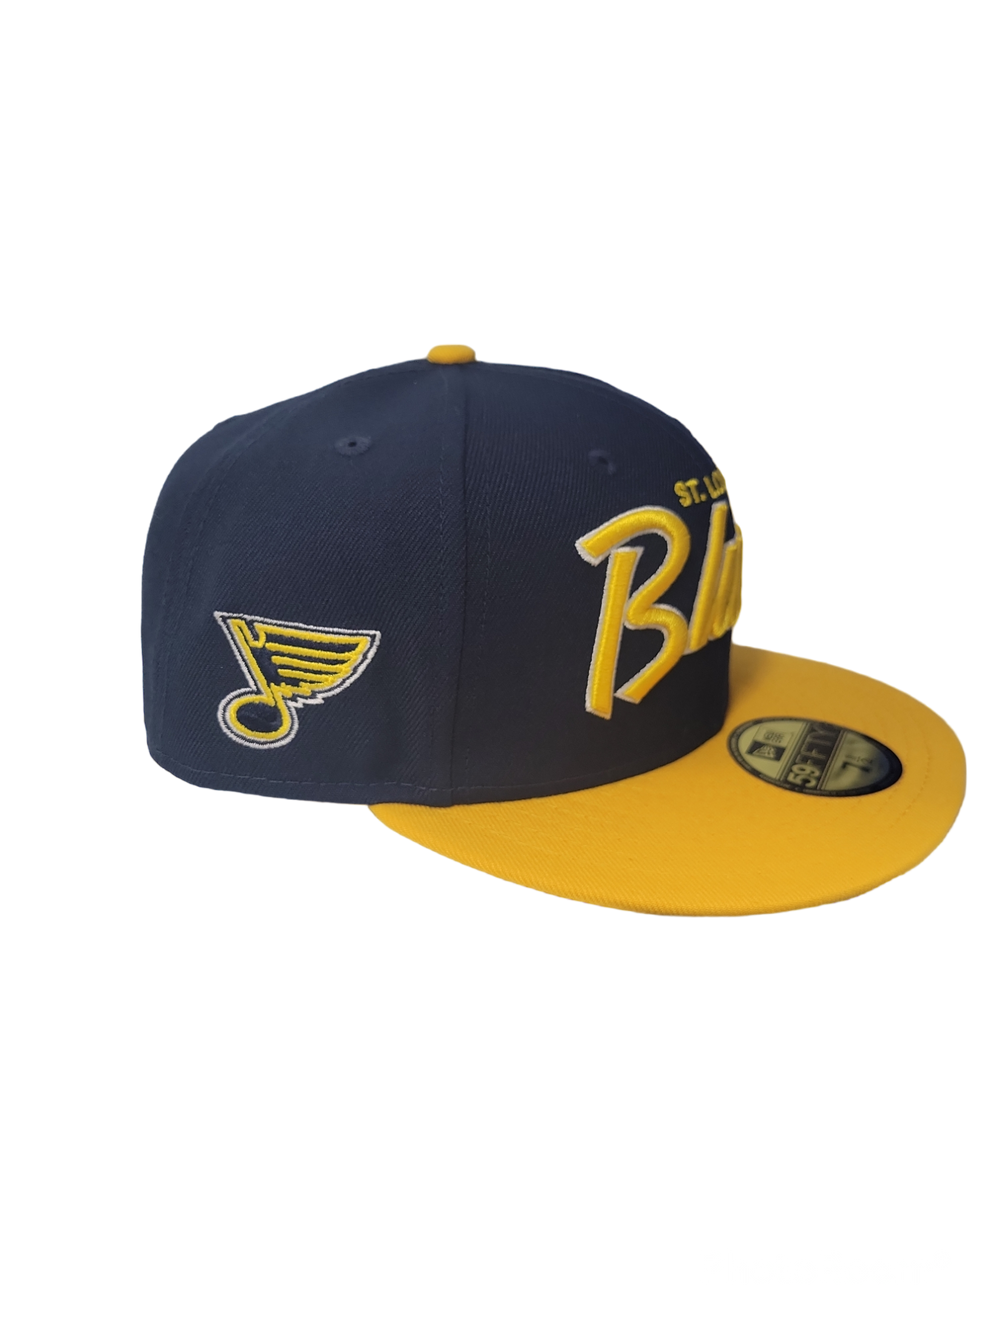 ST. LOUIS BLUES NEW ERA 9FORTY YOUTH PATCH MESH SNAPBACK – STL Authentics